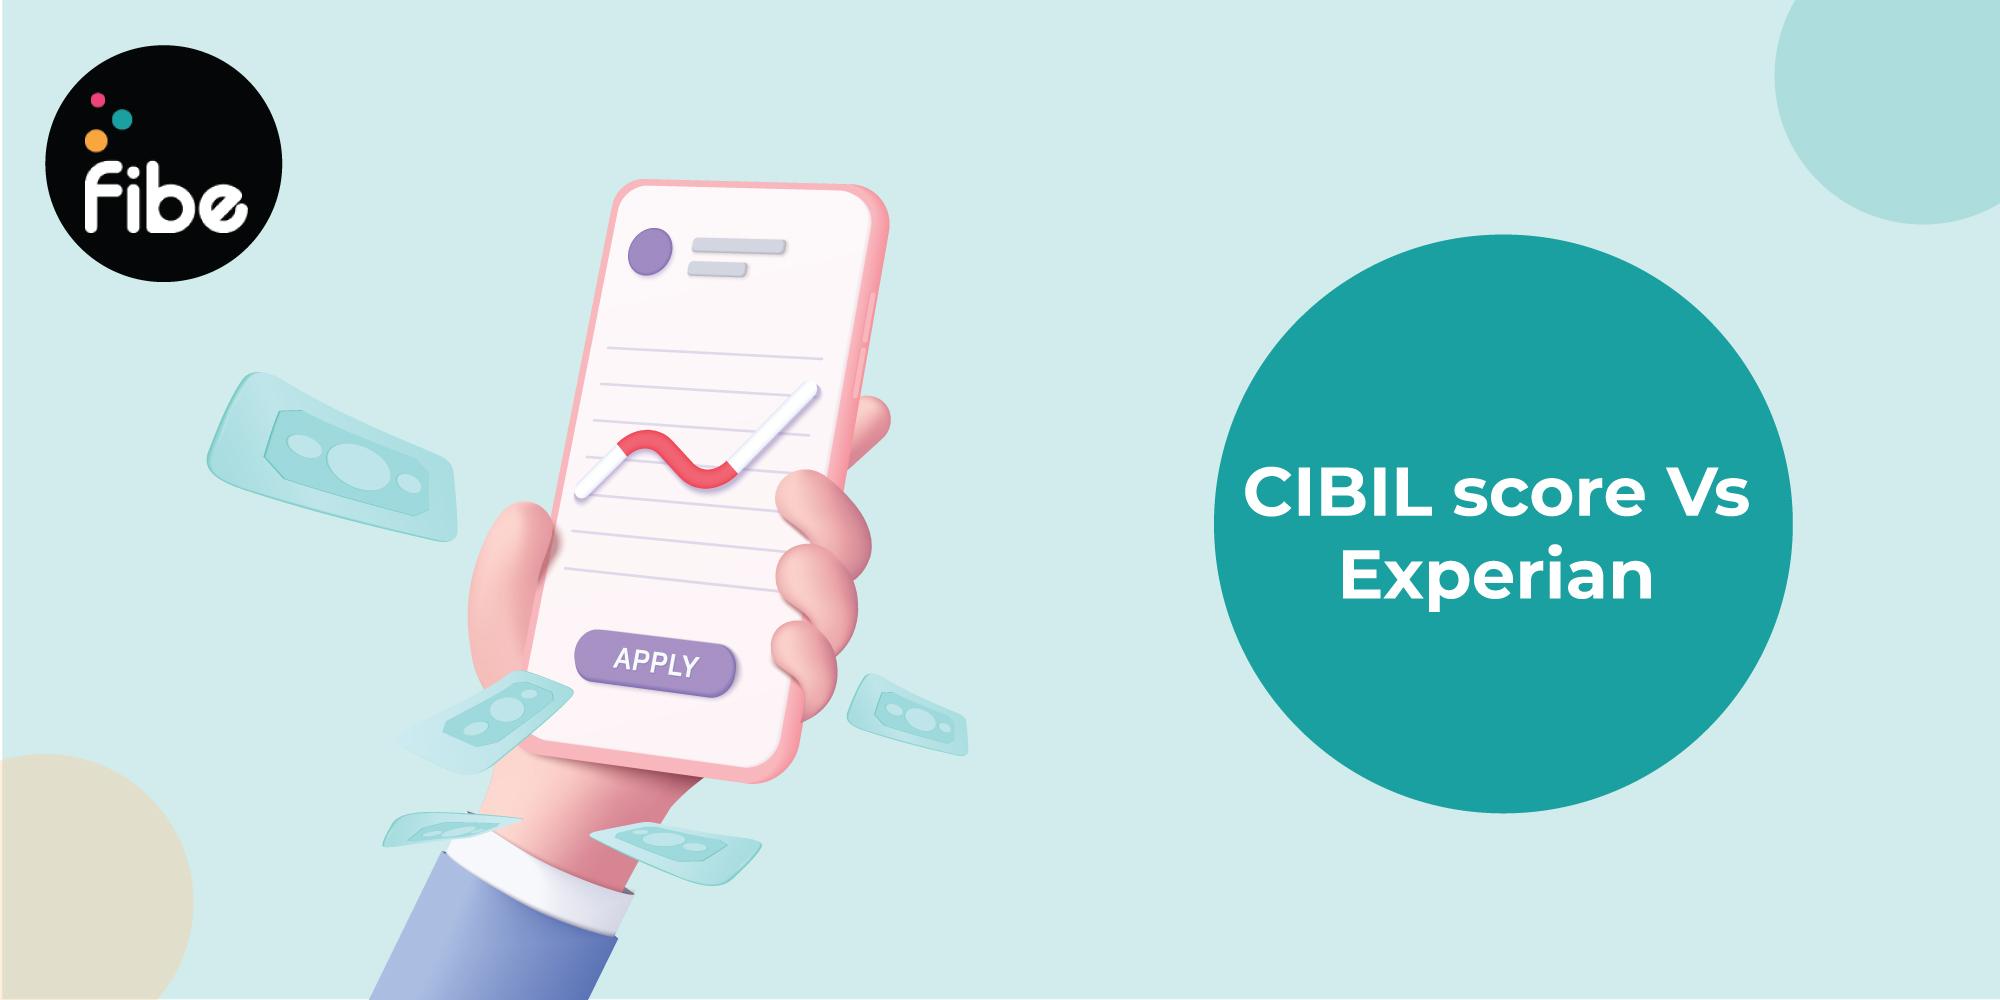 Running an Experian or CIBIL score check? Know these Differences